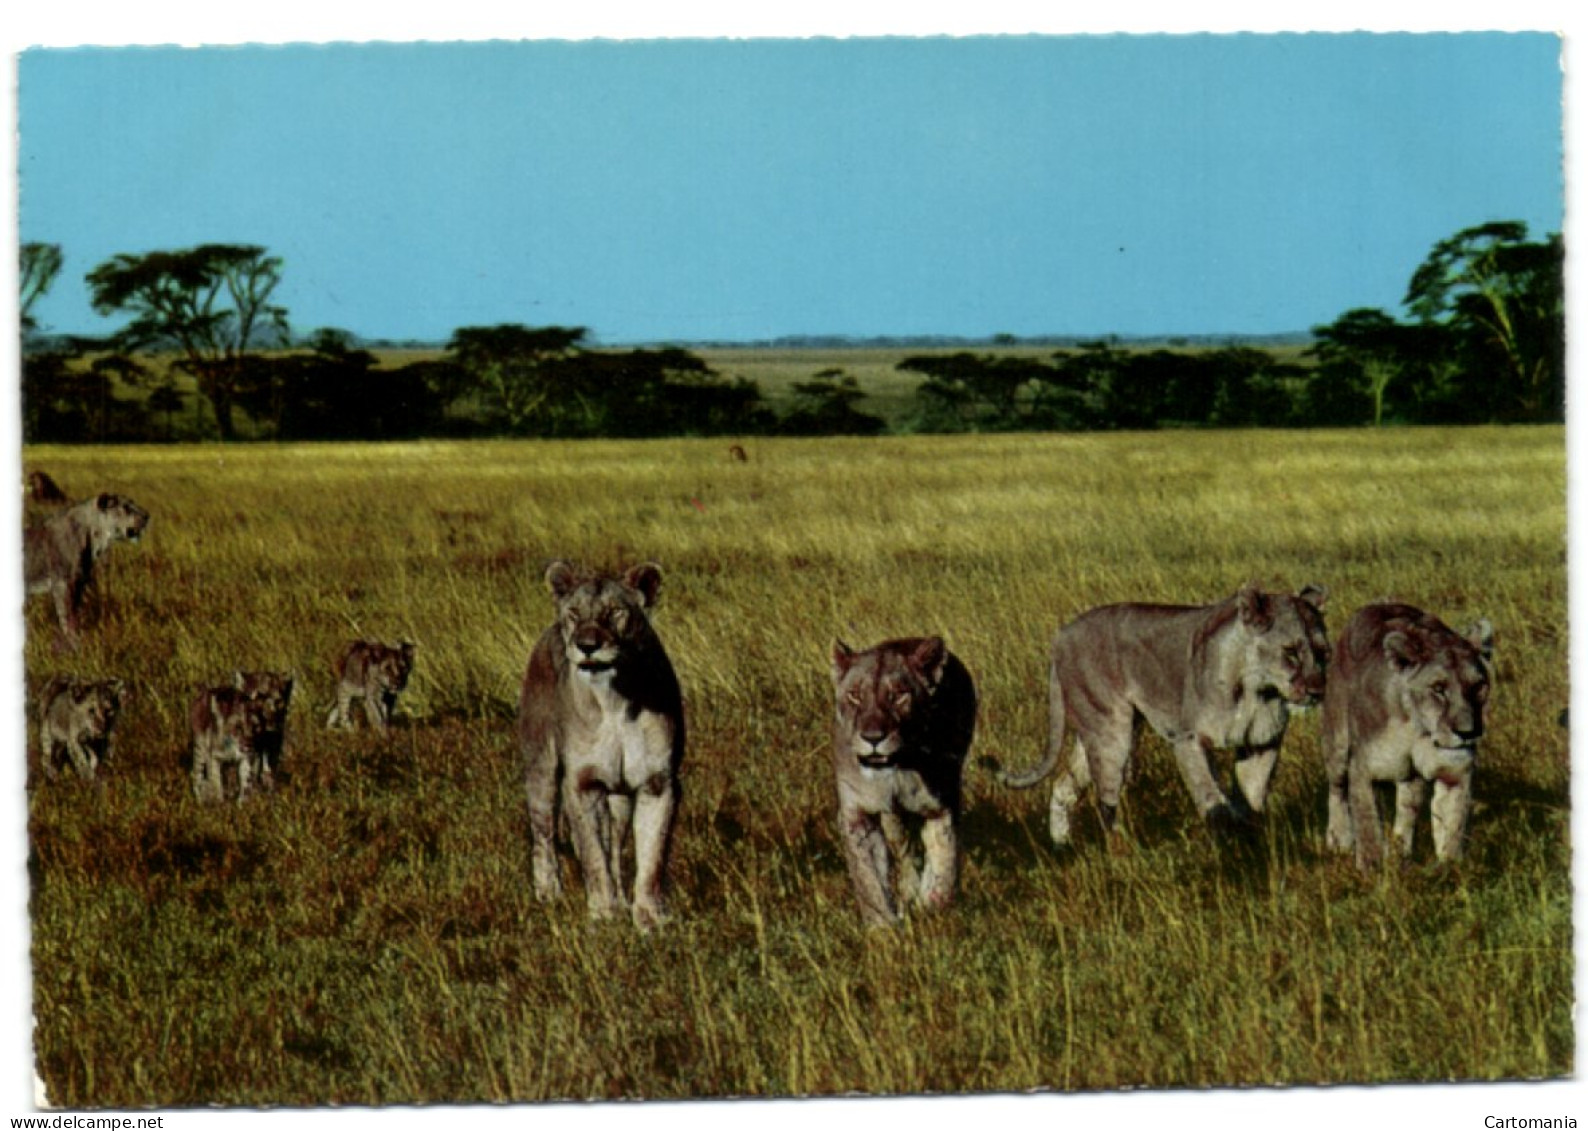 East Africa - African Wildlife - Lionesses And The Cubs - Kenya